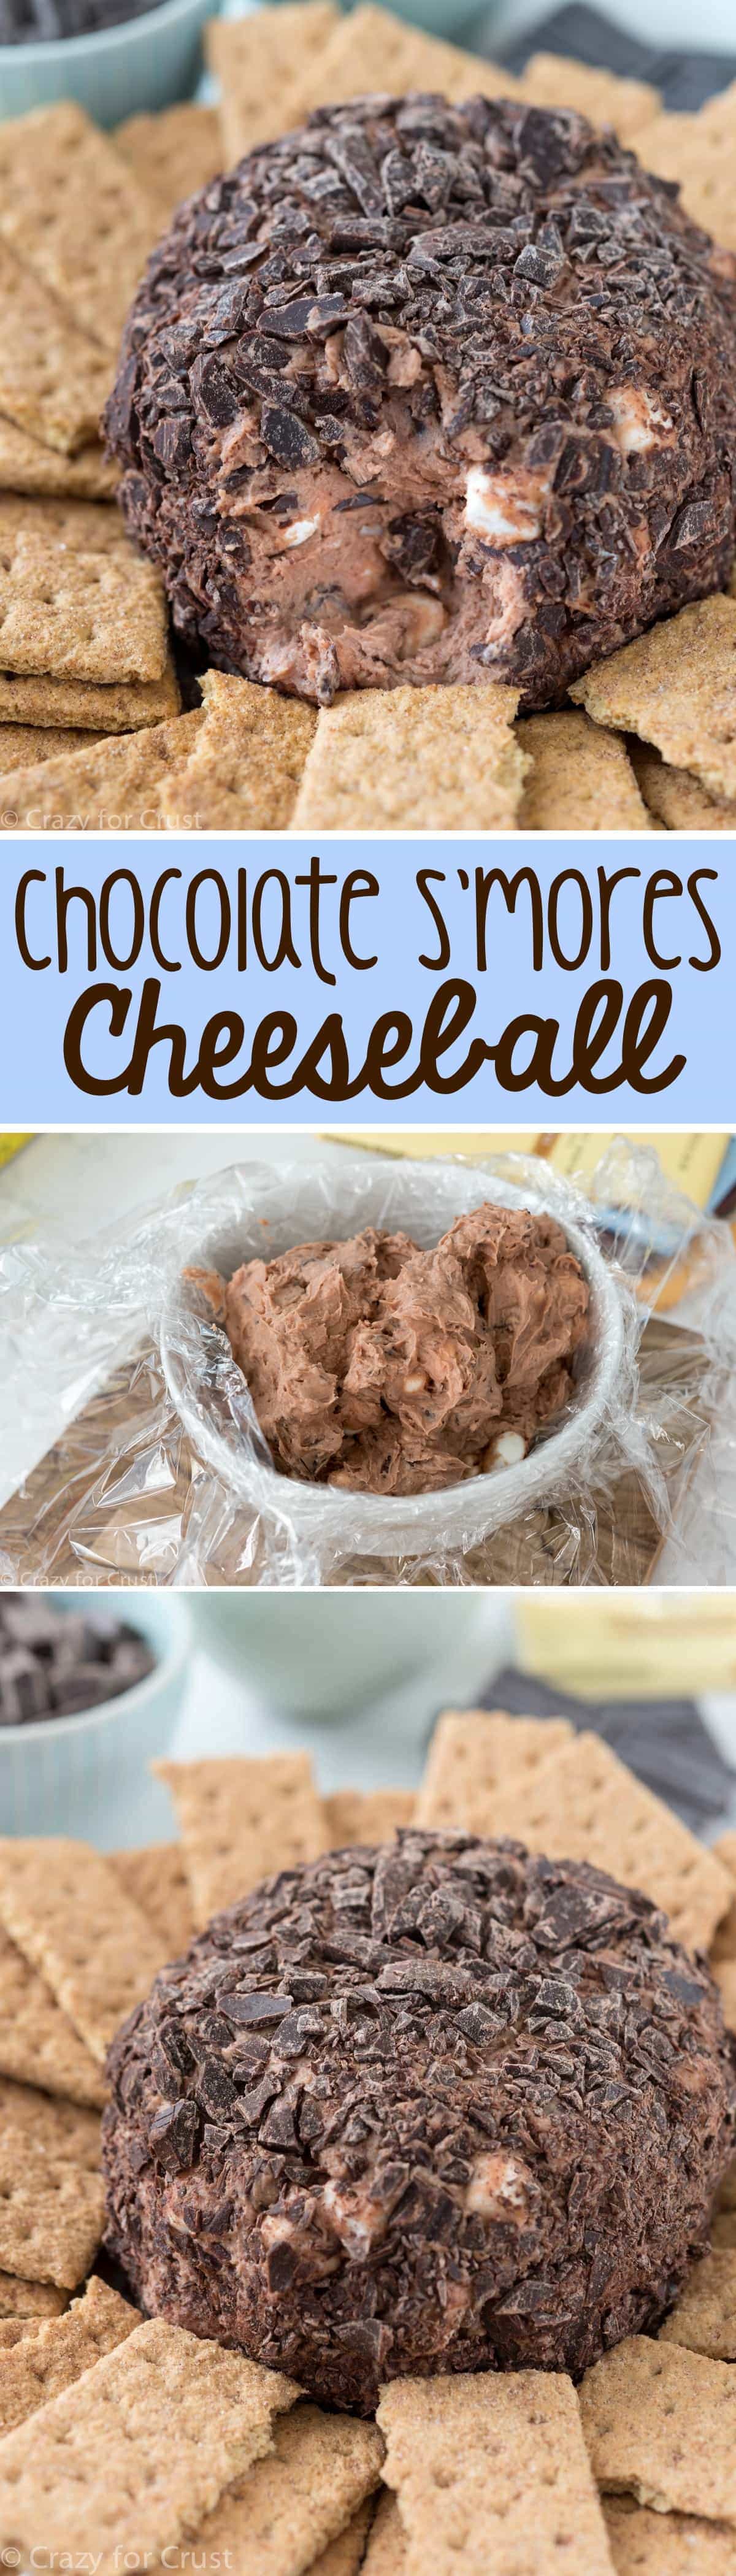 Chocolate S'mores Cheeseball Dip - this easy recipe is perfect for any party! It's chocolate, marshmallow, and s'mores all in one sweet appetizer dip recipe!